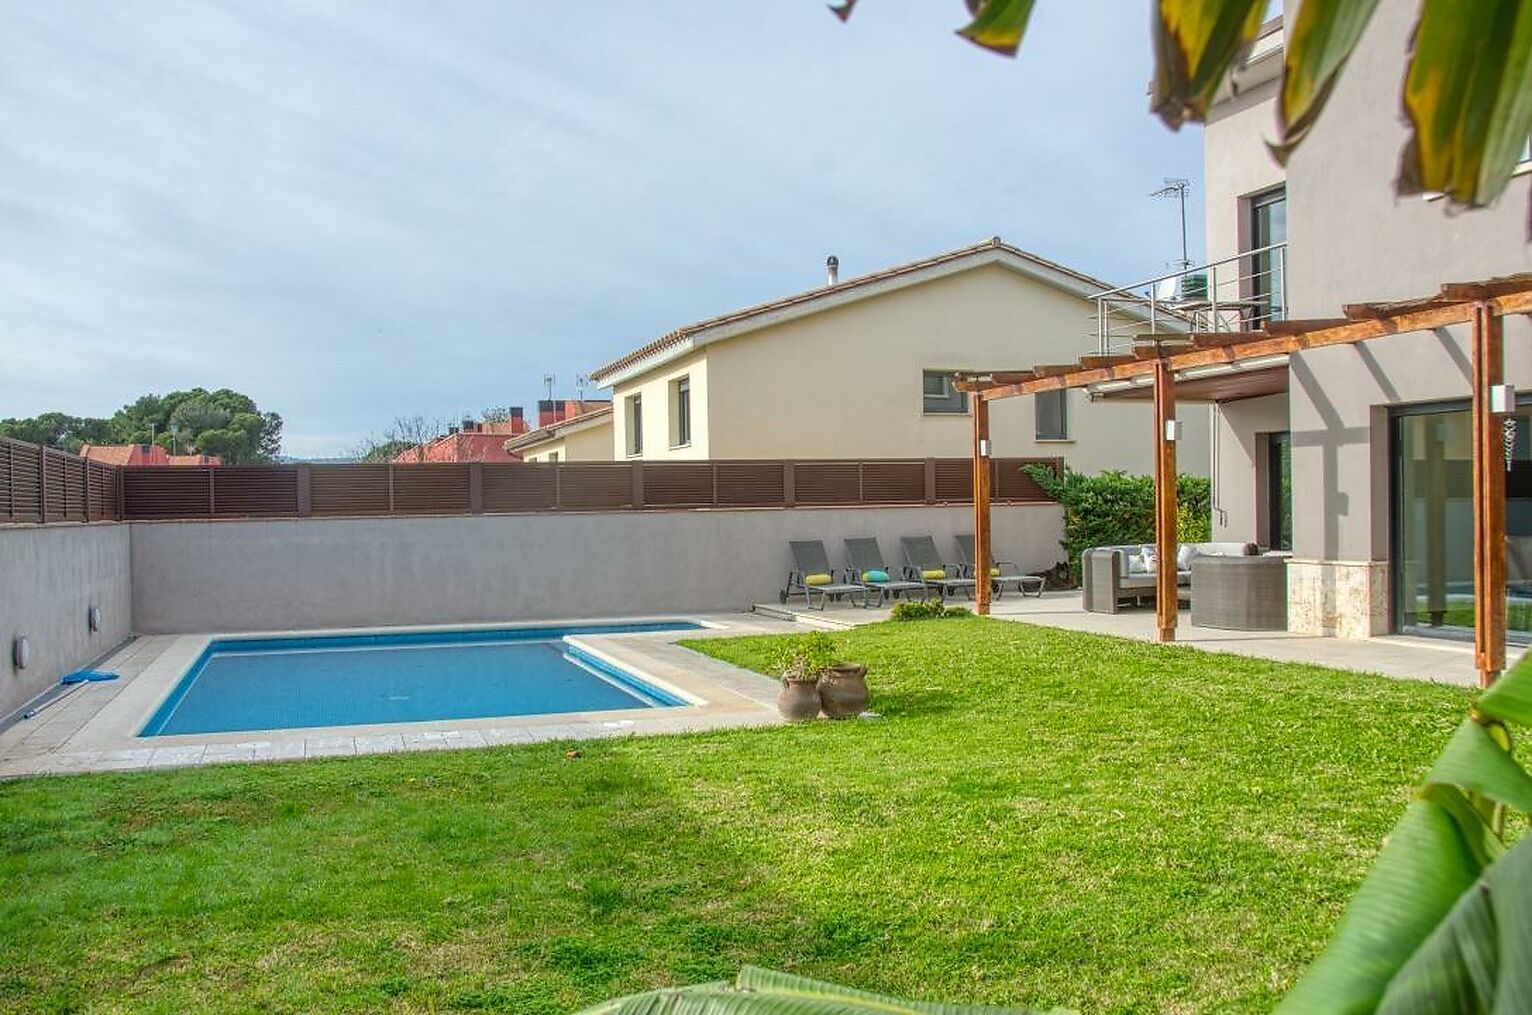 Spectacular villa for sale in the Mas Pareras area of Palamós.